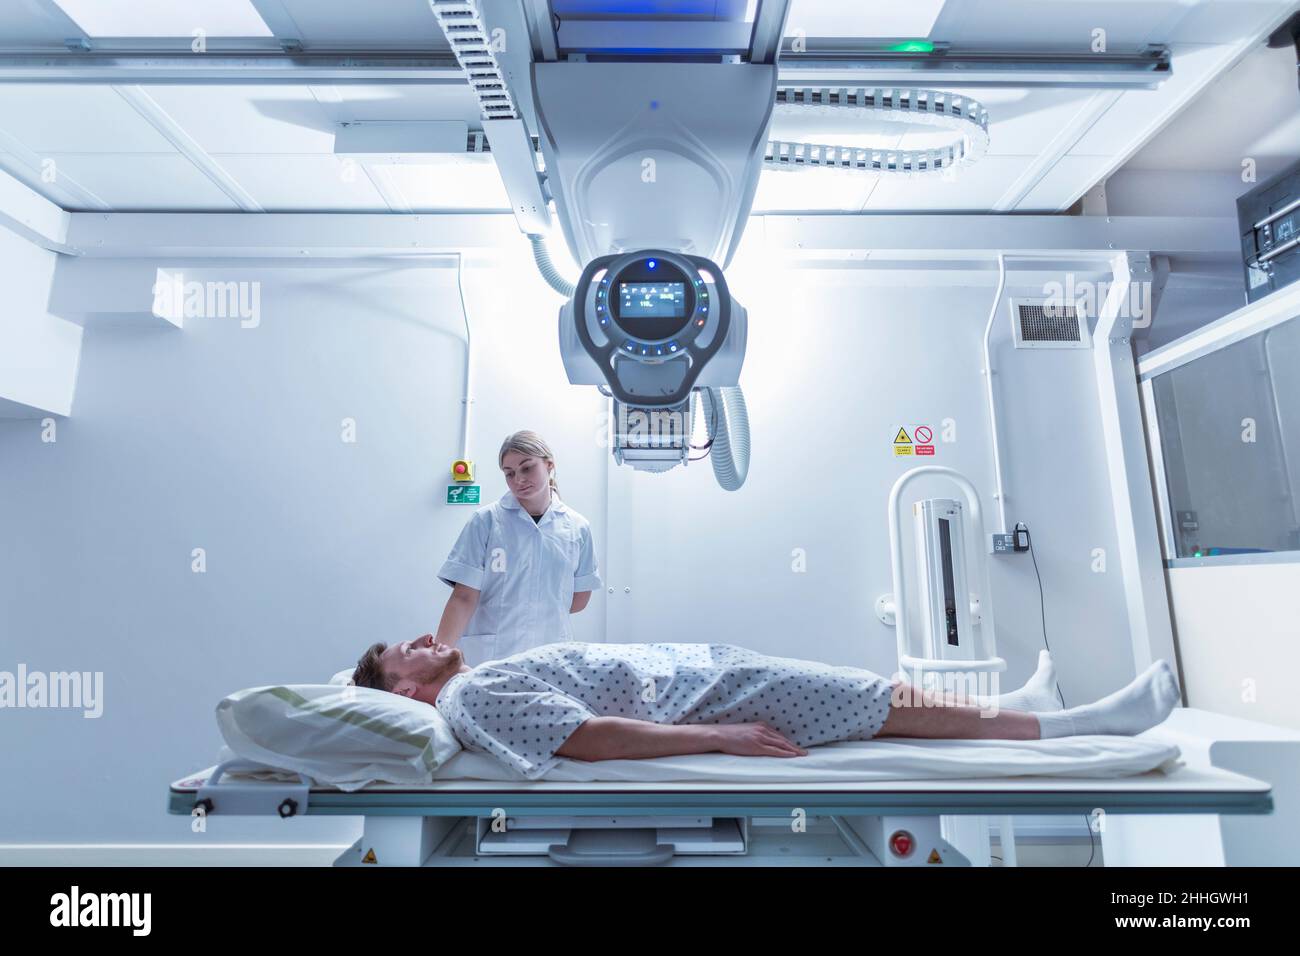 Radiologist assisting patient atÊx-ray machine in hospital Stock Photo